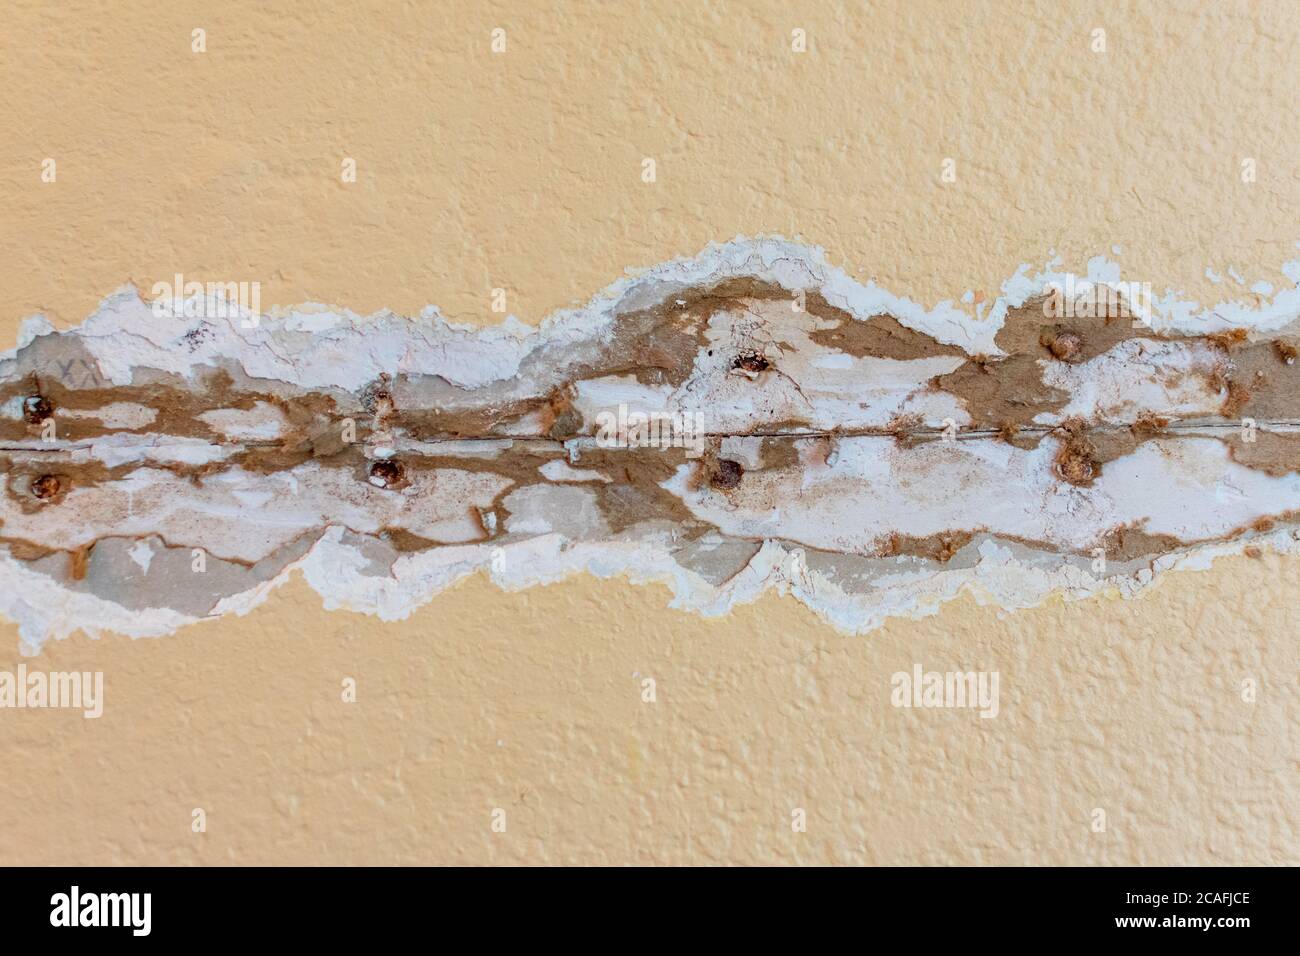 Drywall seam crack repair in progress. Excavated damaged area. Exposed drywall joint with rusty nails. Stock Photo